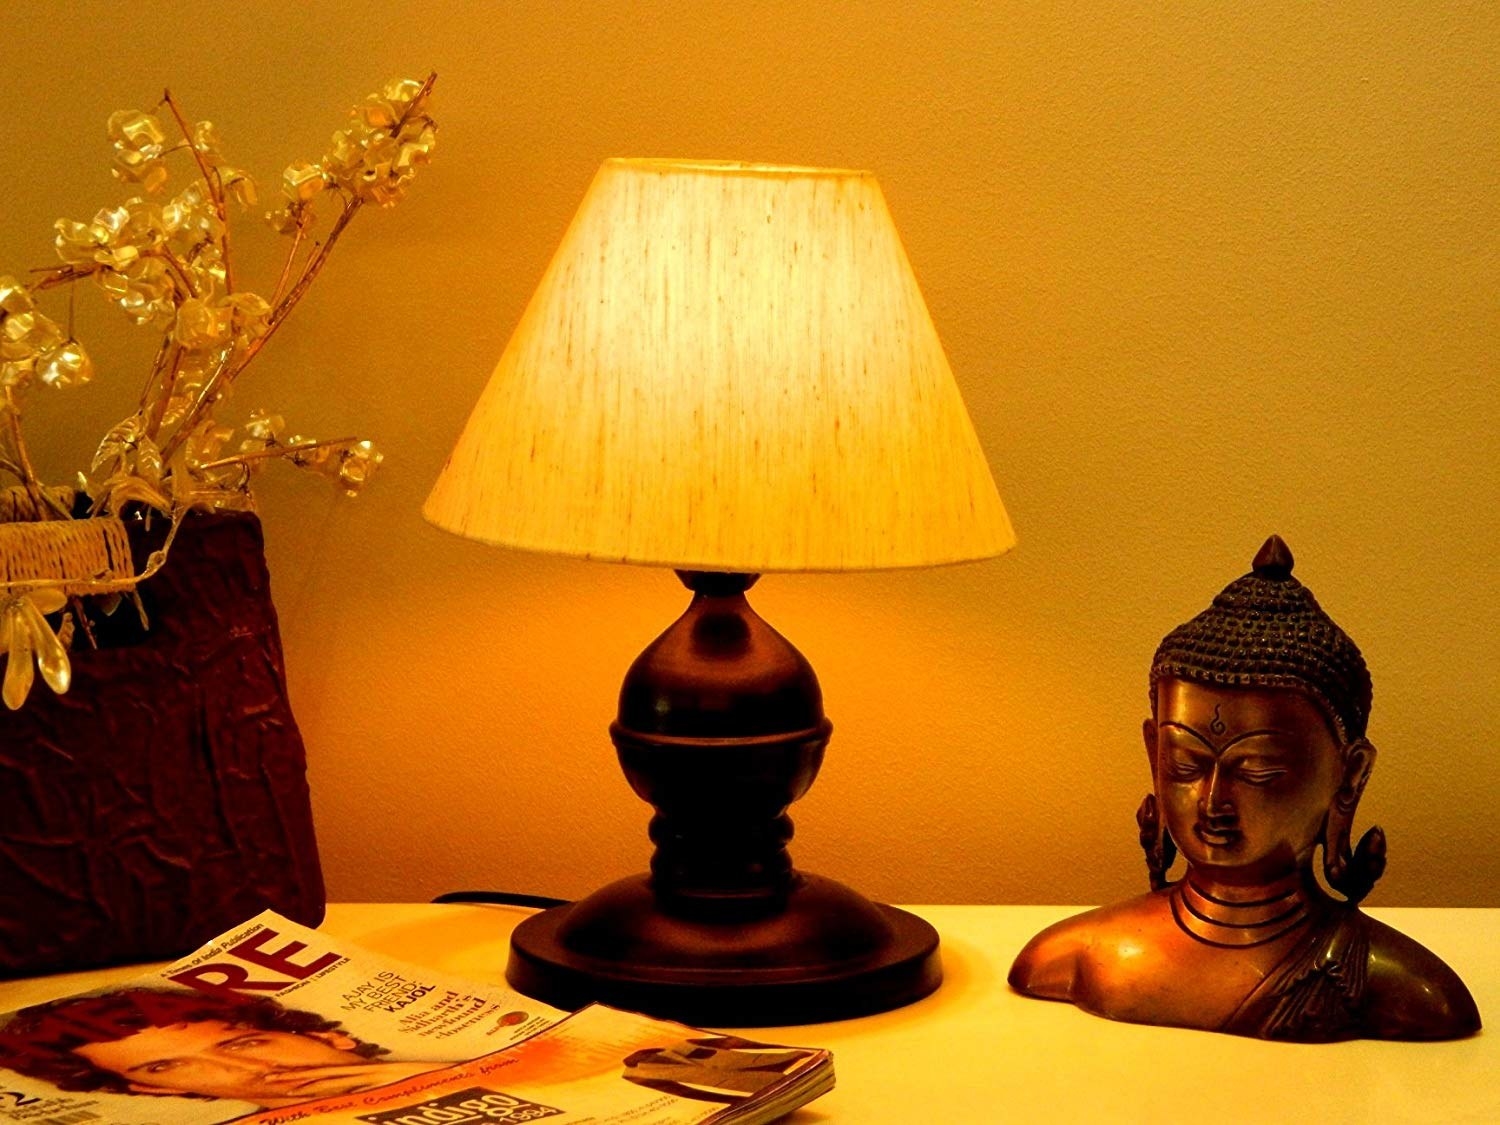 A conical lamp on a table beside magazines